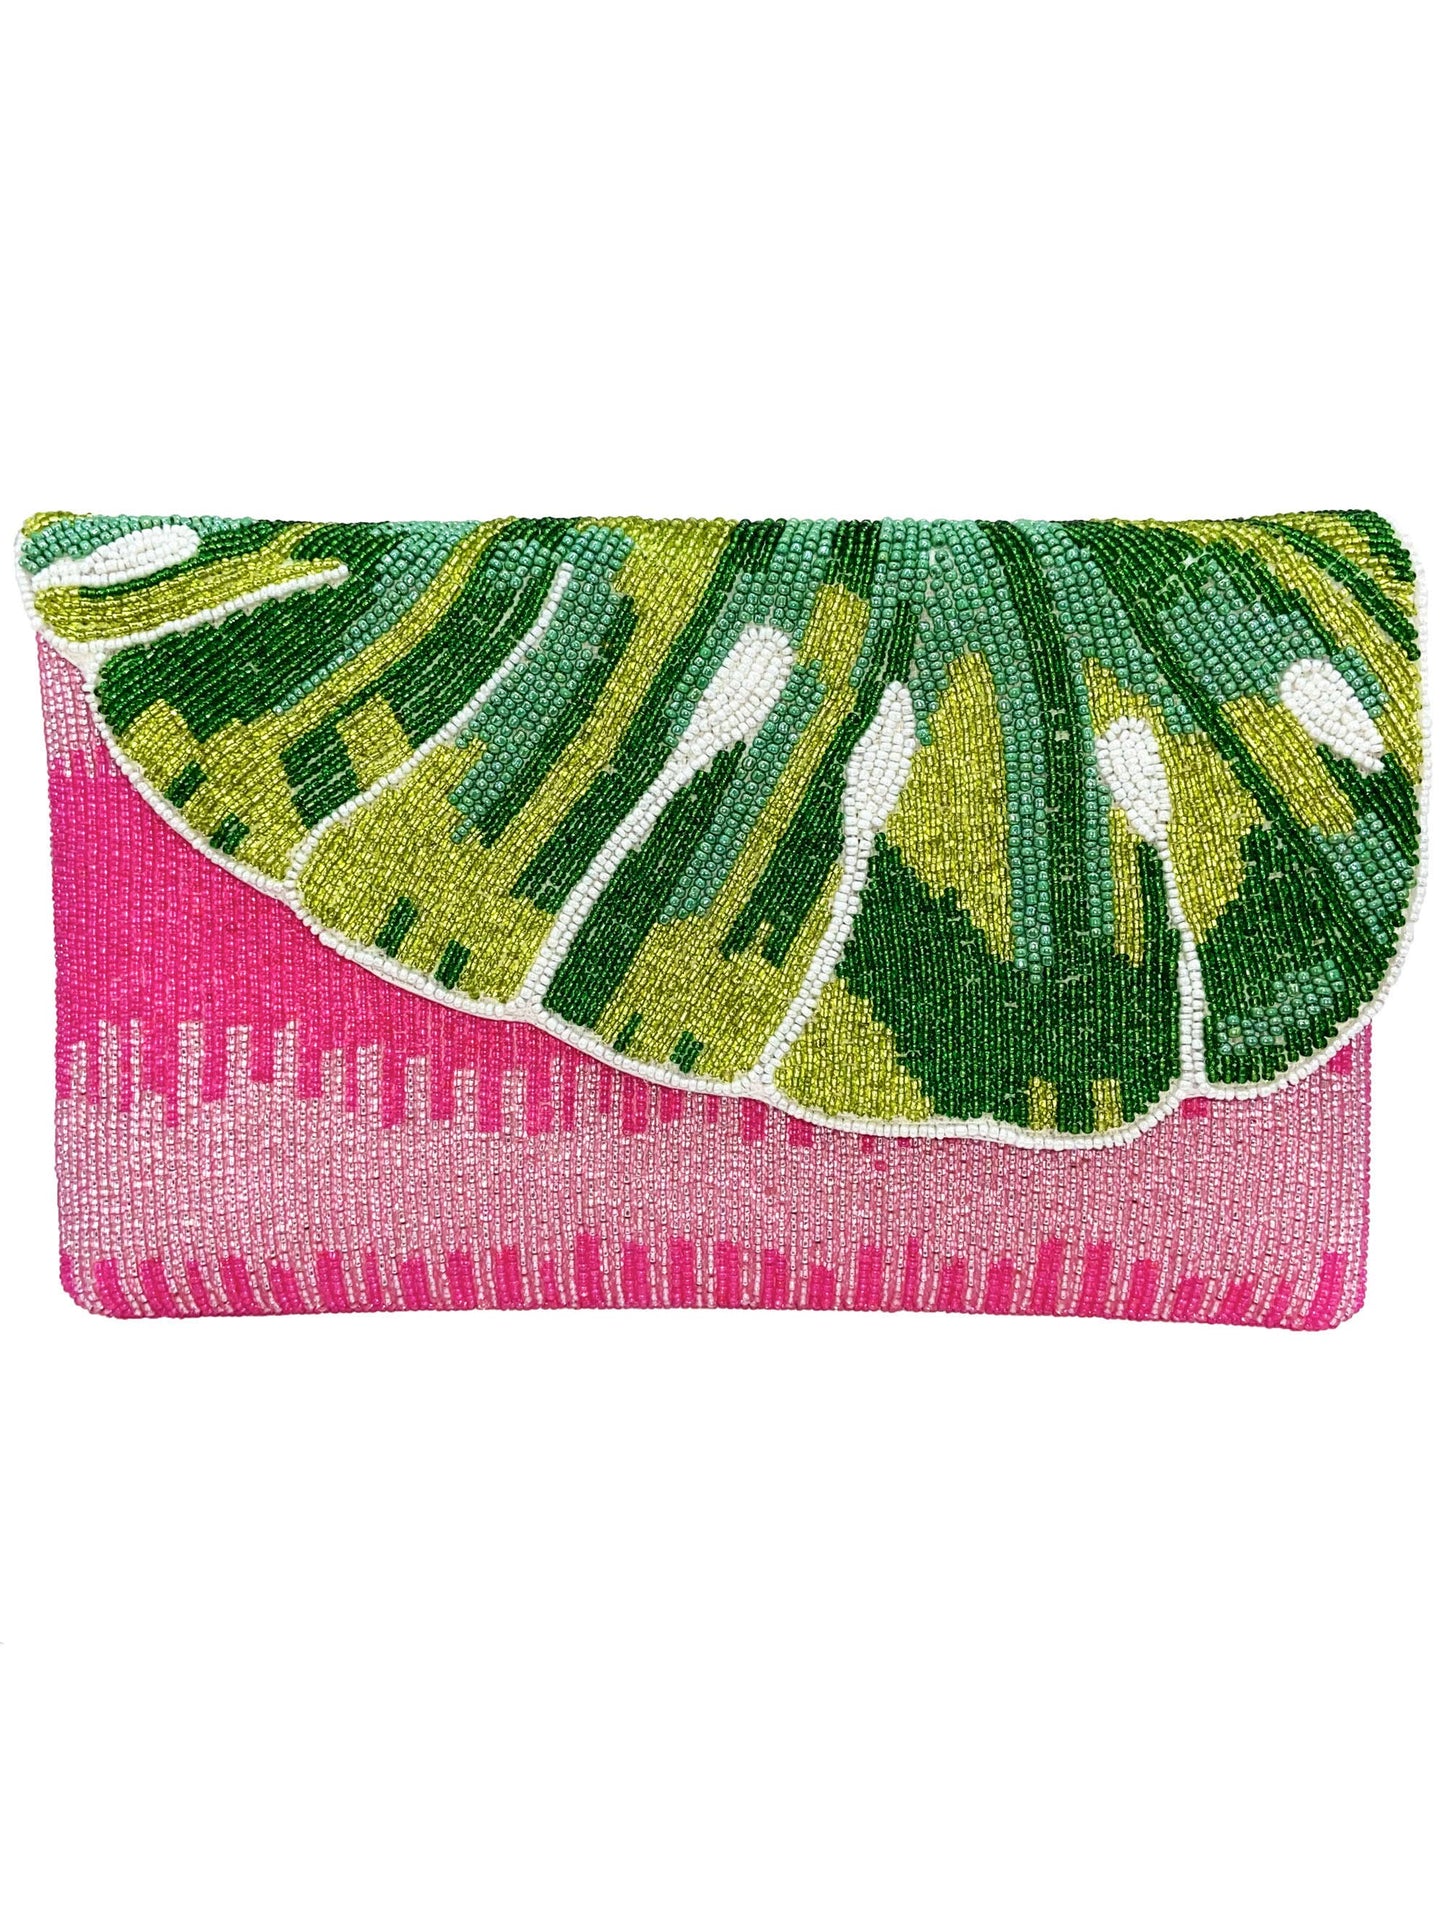 MONSTERA LEAF Beaded Clutch LAC-SS-731